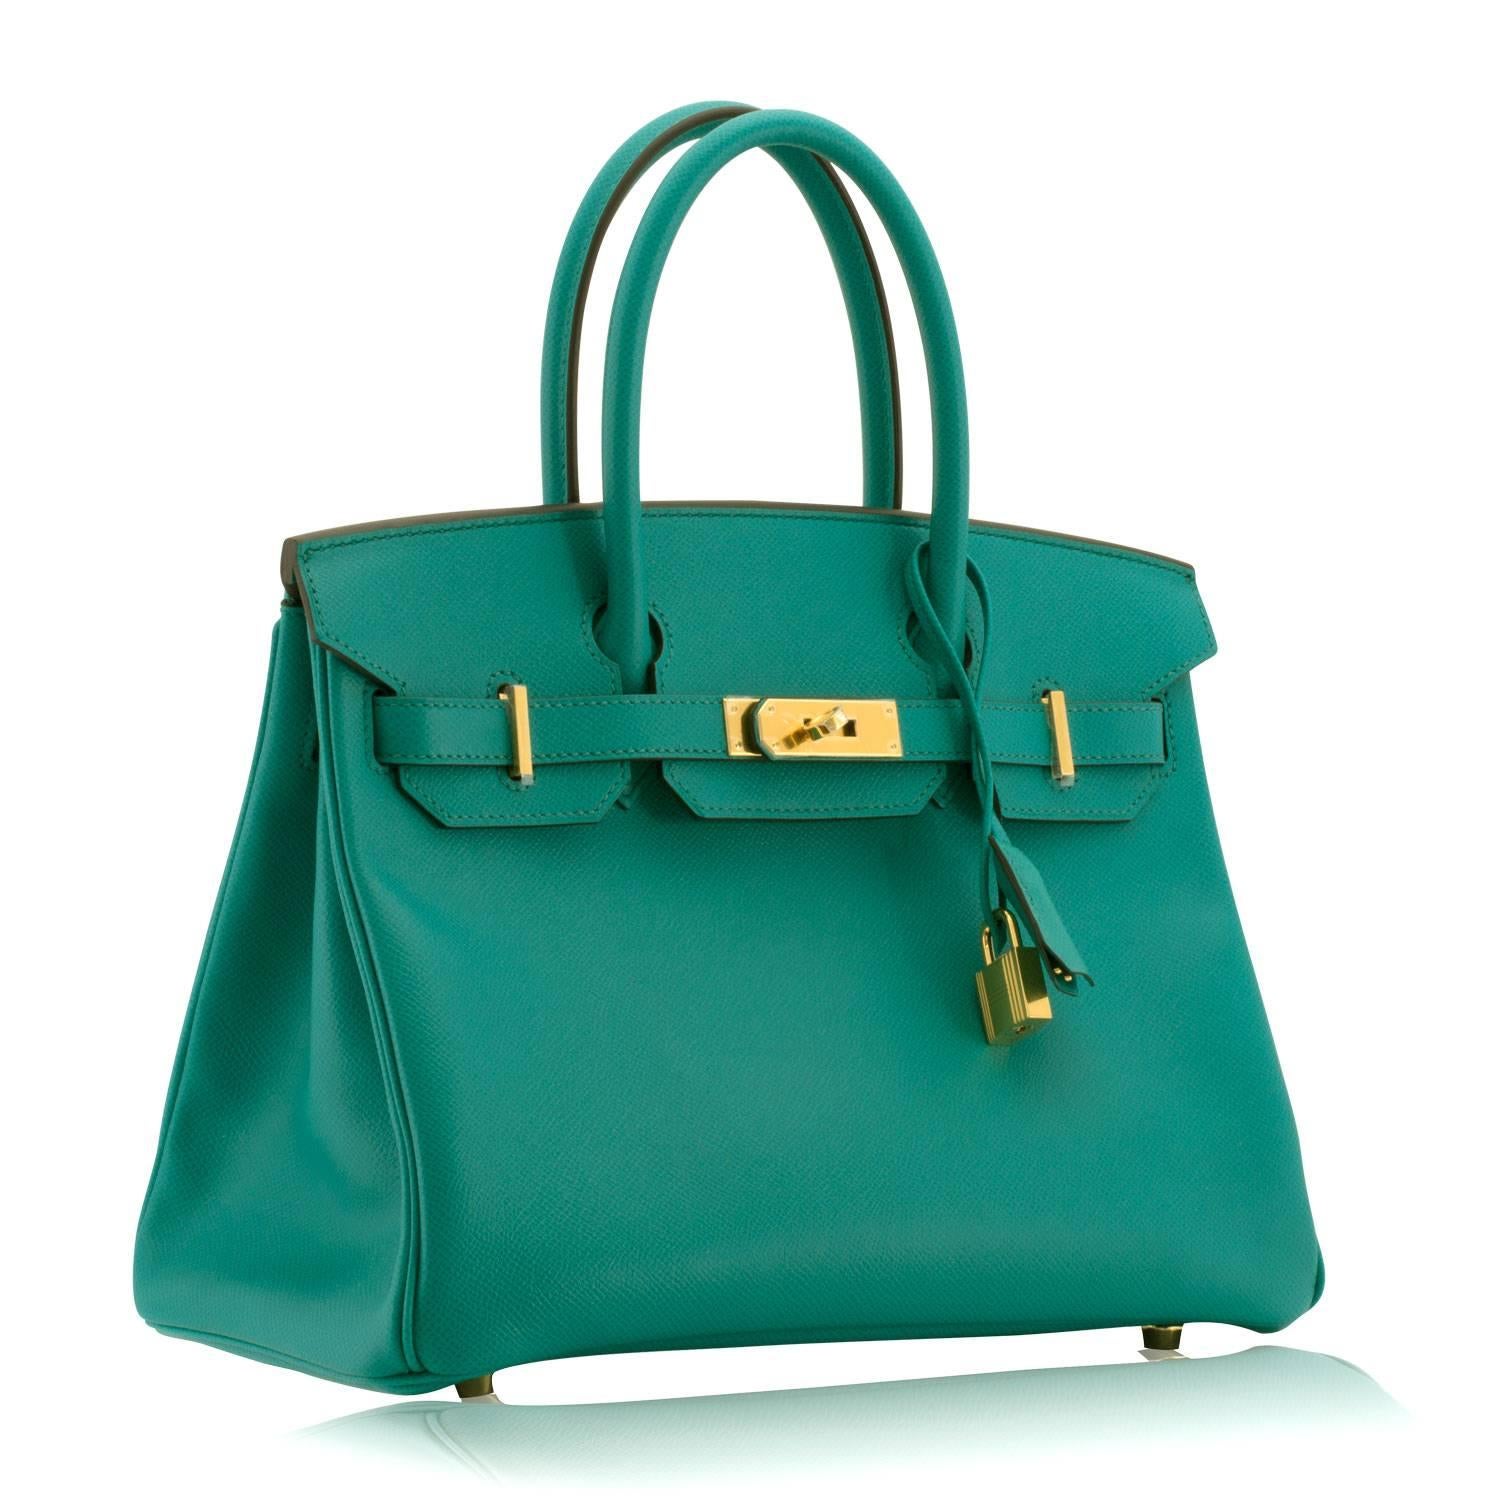 Hermes Handbag Birkin 30 Veau Epsom 7F Bleu Paon Gold Hardware 2016.

Pre-owned and never used.

Bought it in Hermes store in 2016.

Composition: Leather.

Model: Birkin.

Size: 30cm width x 22cm height x 16cm length

Color: 7F Blue